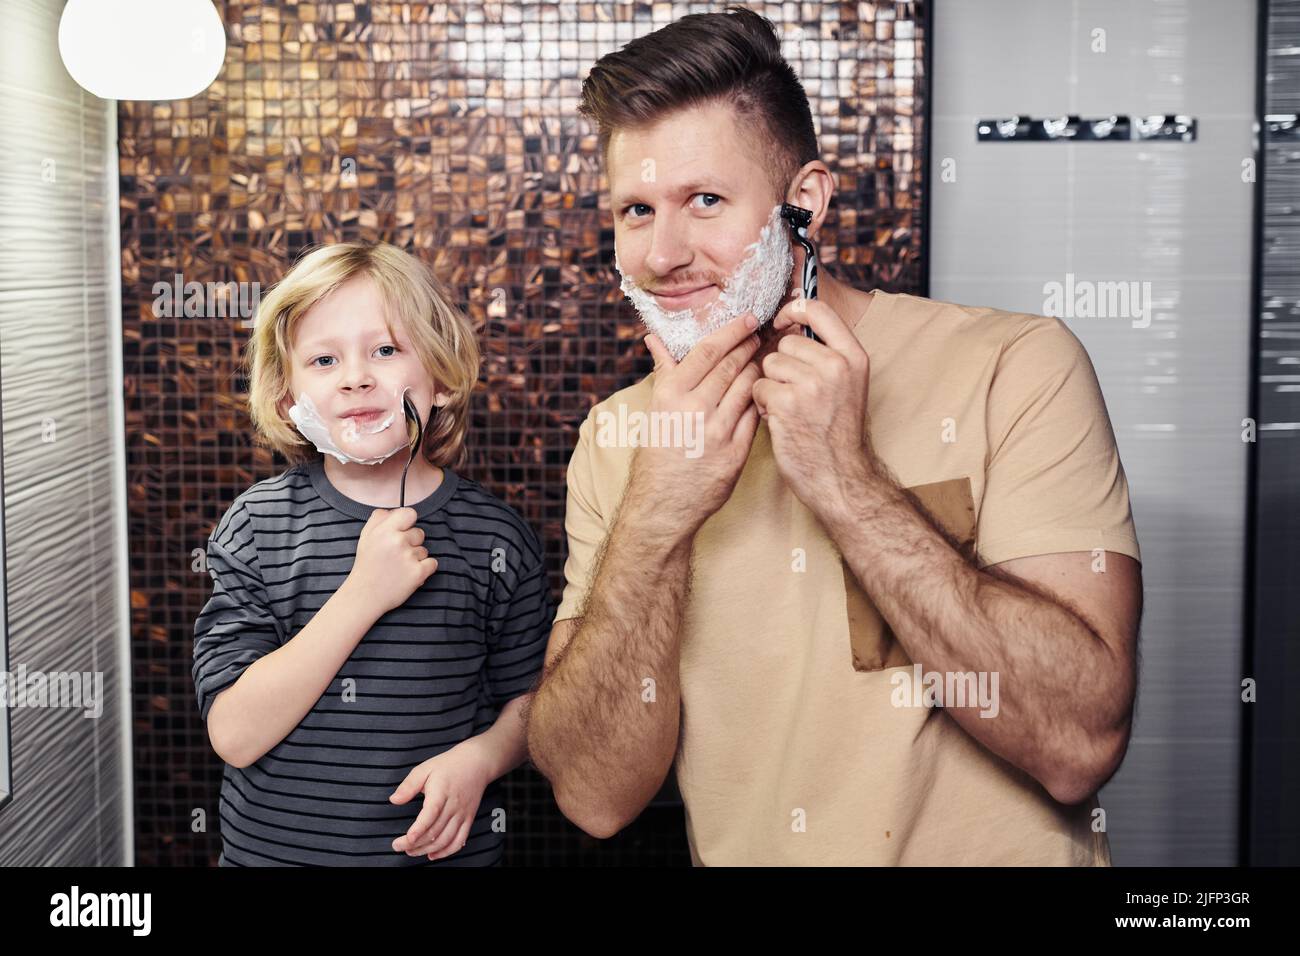 Portrait of happy young father shaving with little boy imitating dad and smiling Stock Photo